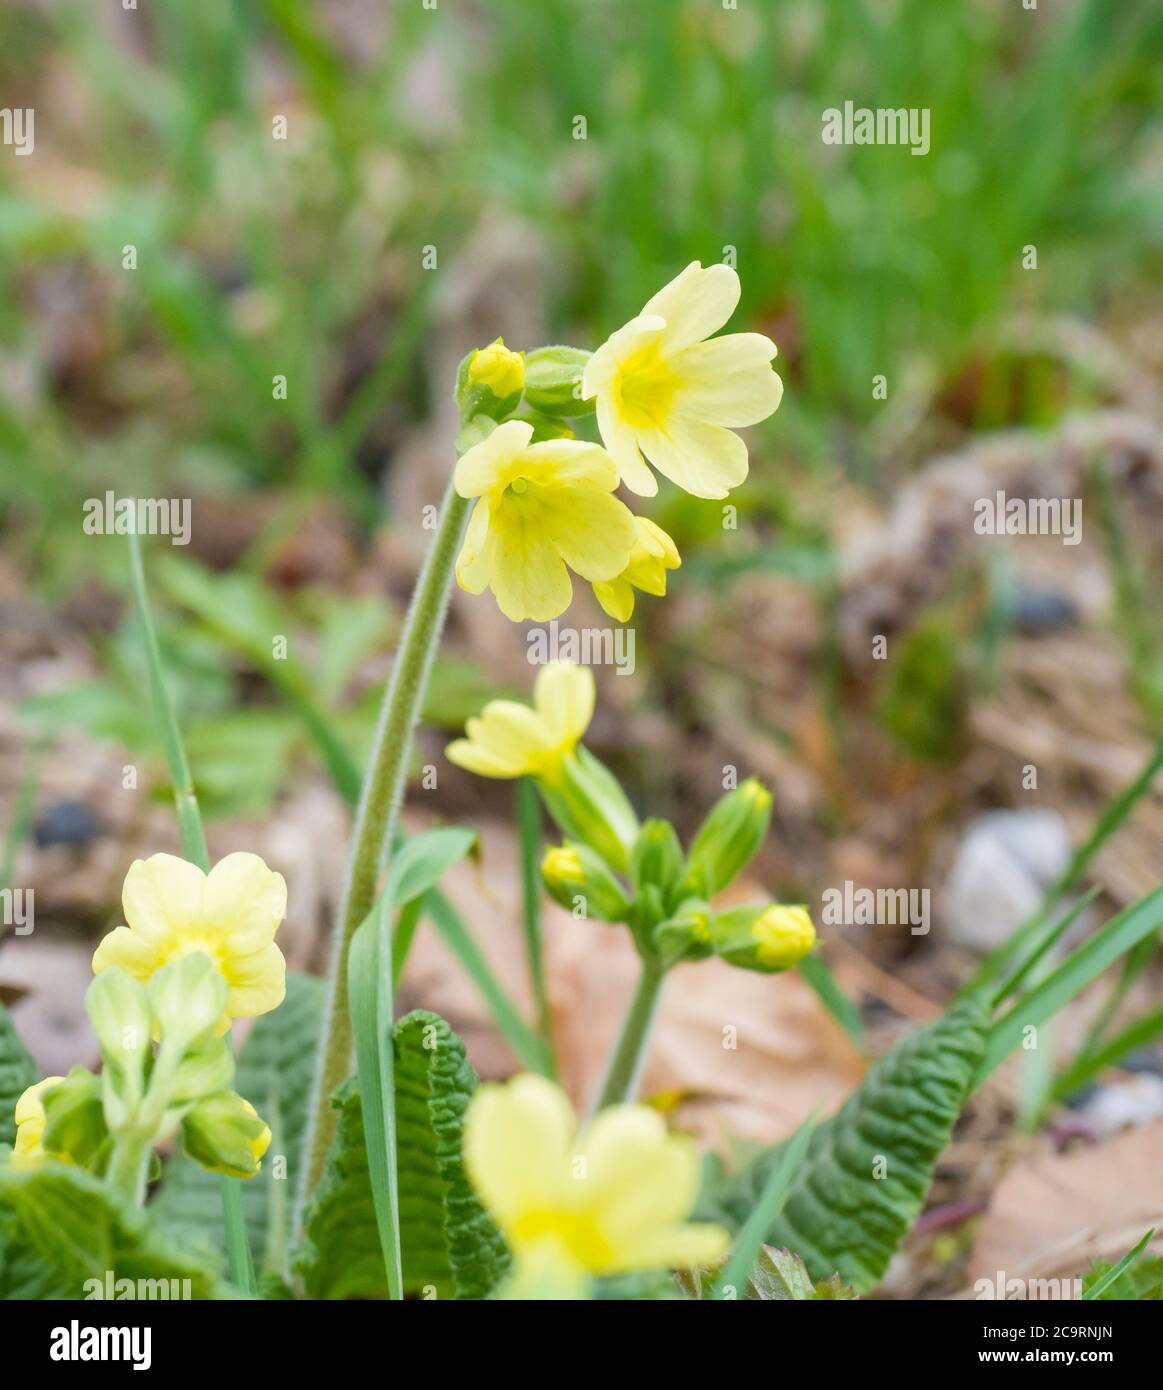 close up yellow primrose Primula vulgaris flowers in grass, spring floral background, selective focus Stock Photo